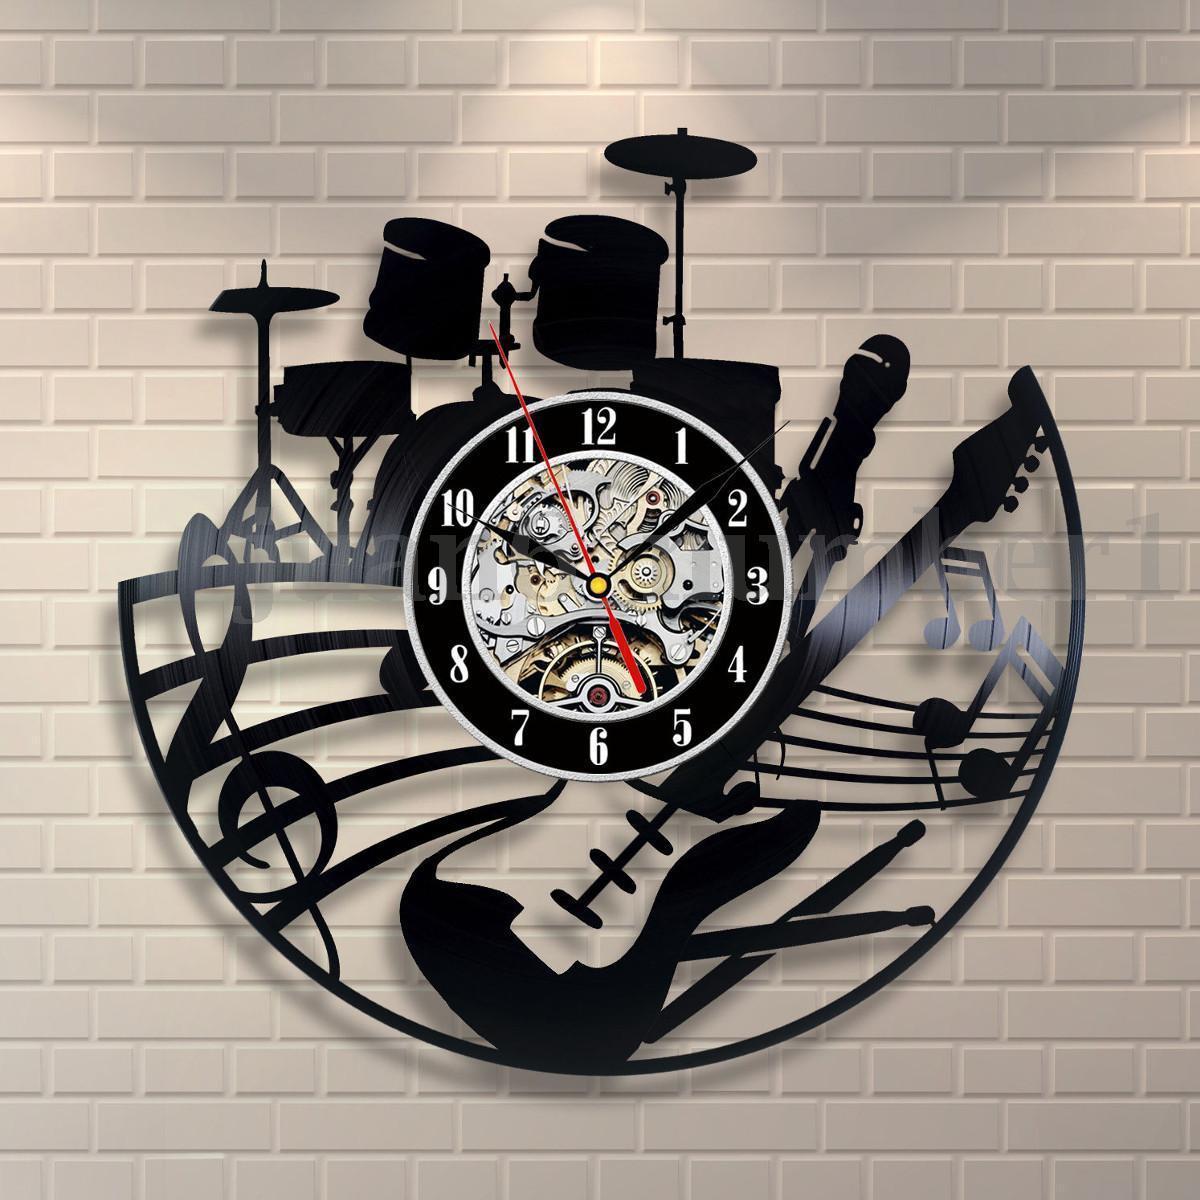 Black Music Instruments Notes Exclusive Wall Clock Made Of Vinyl Record GIFT,Christmas gift,specialdesign,hot sale